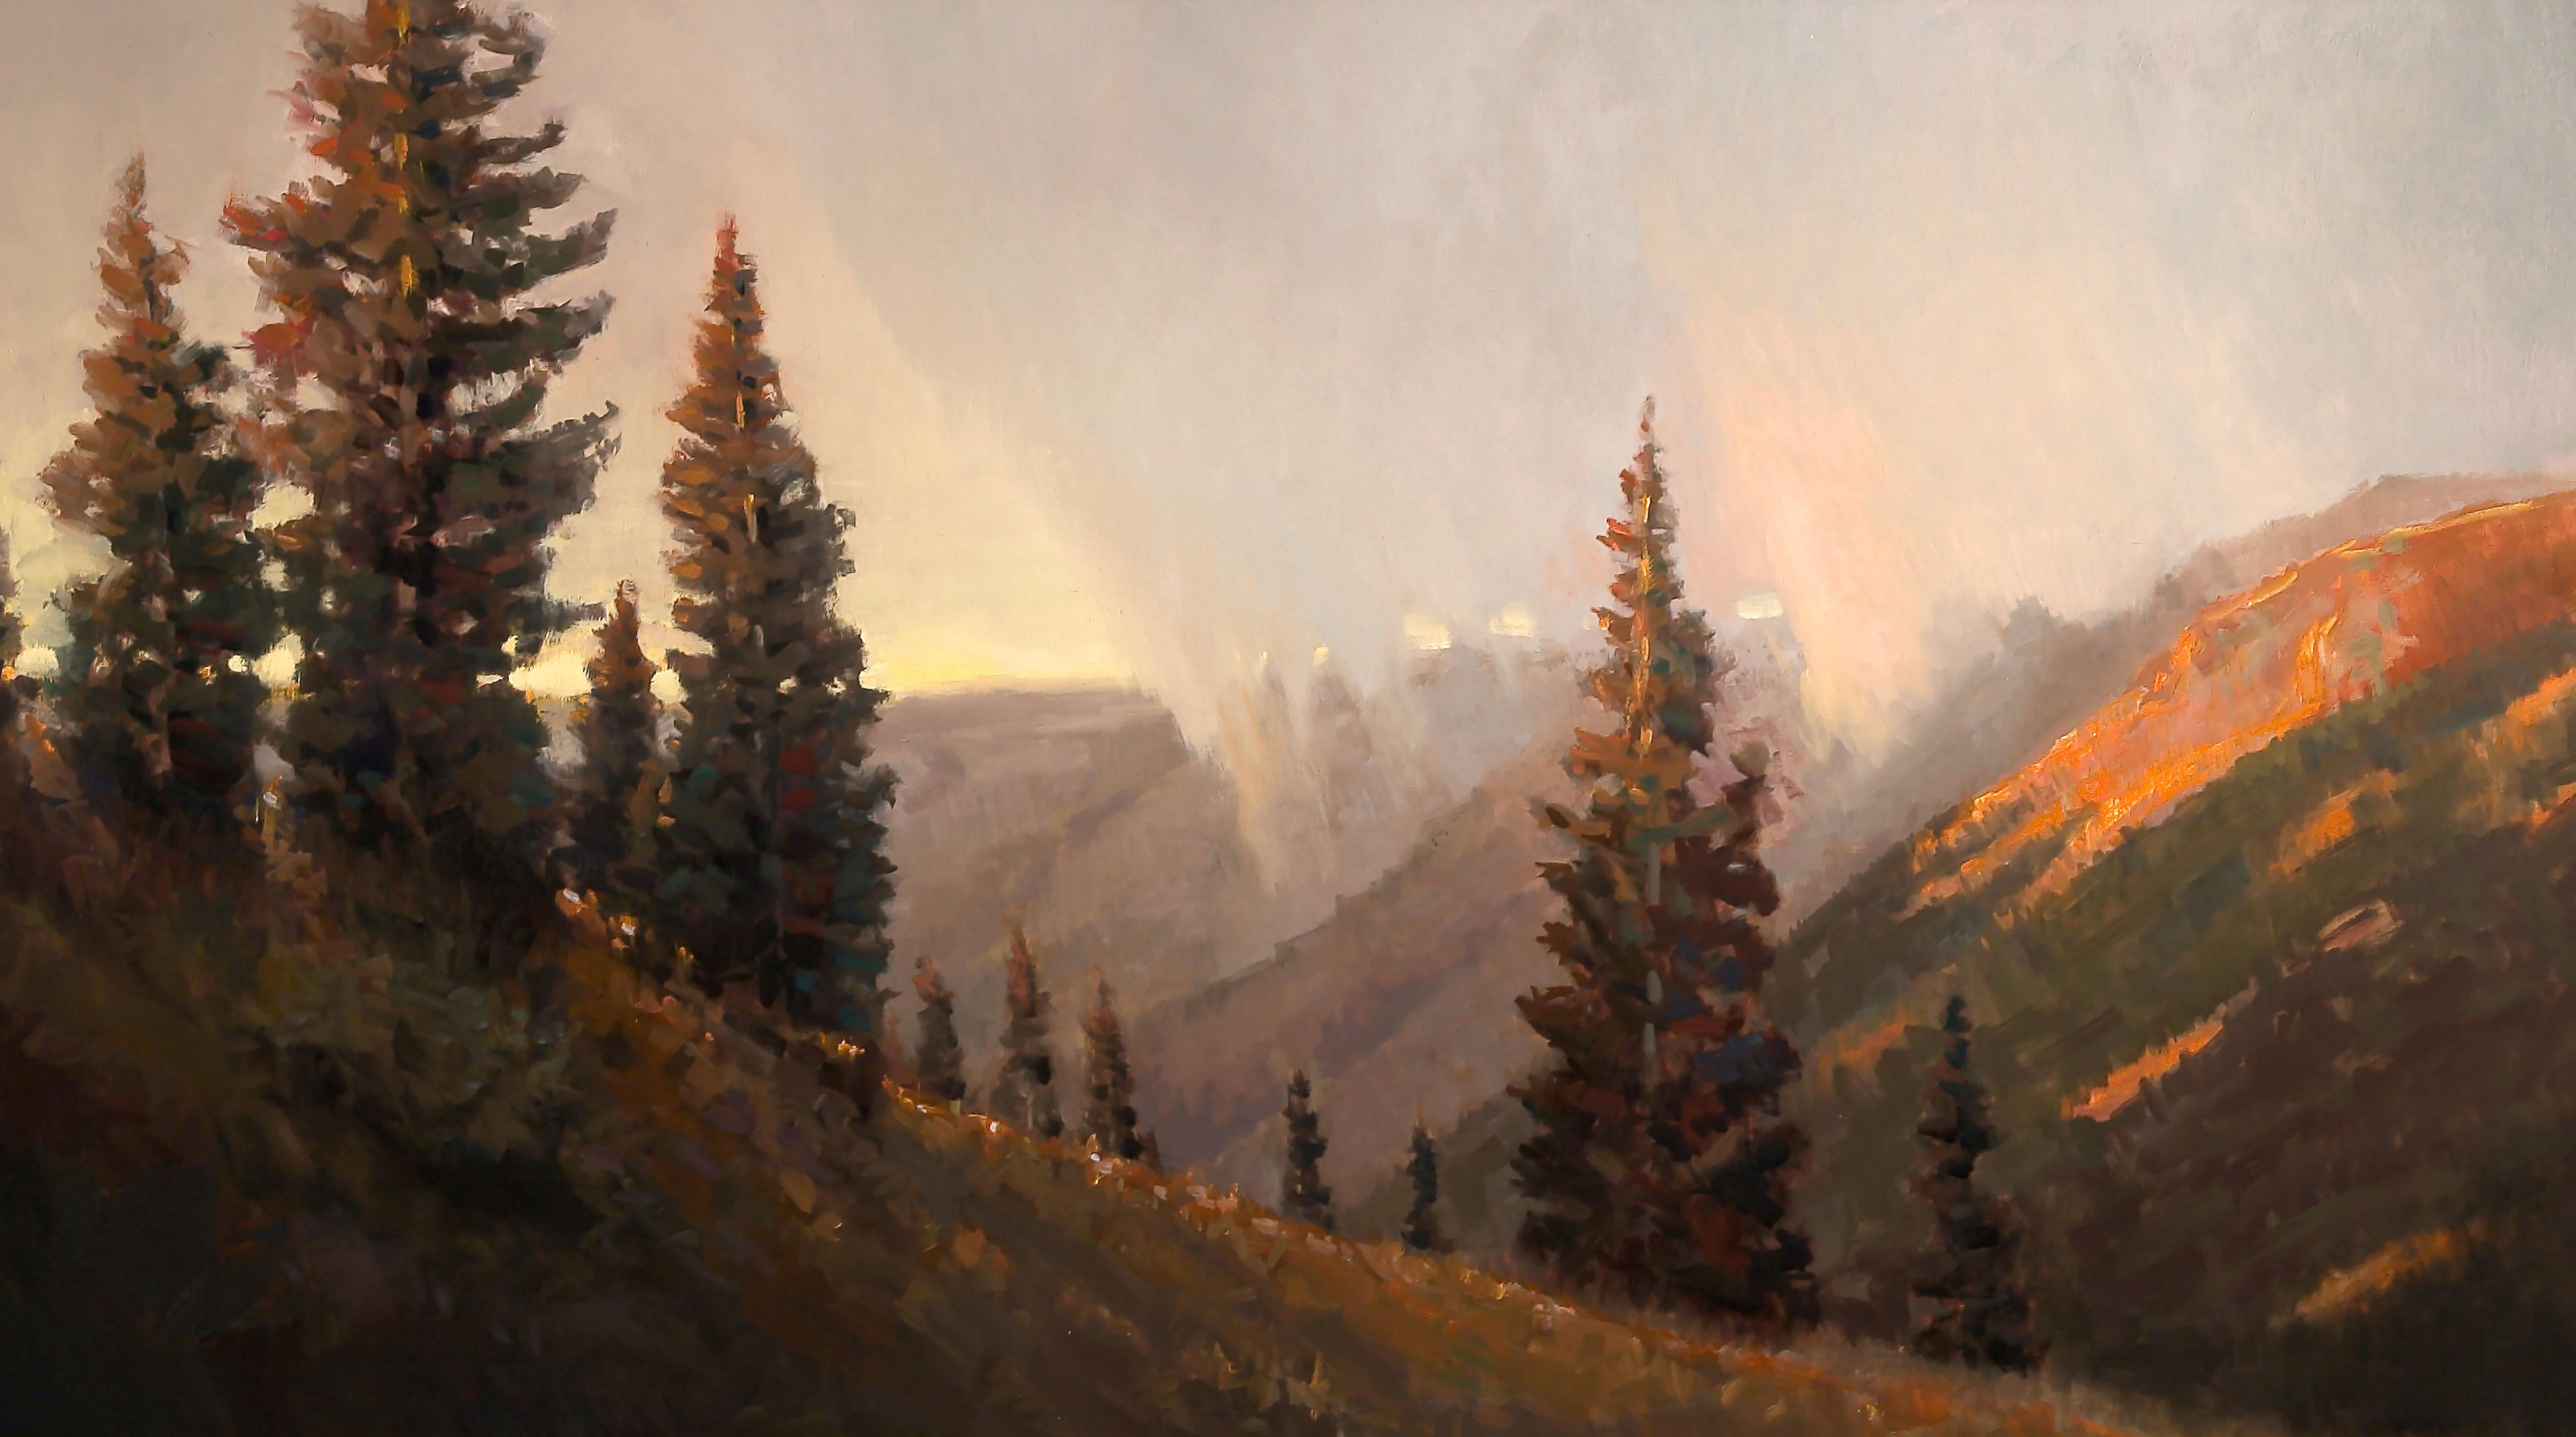 Peter Campbell Landscape Painting - Red Mountain Pass (landscape, mountains, sunlight, autumn)